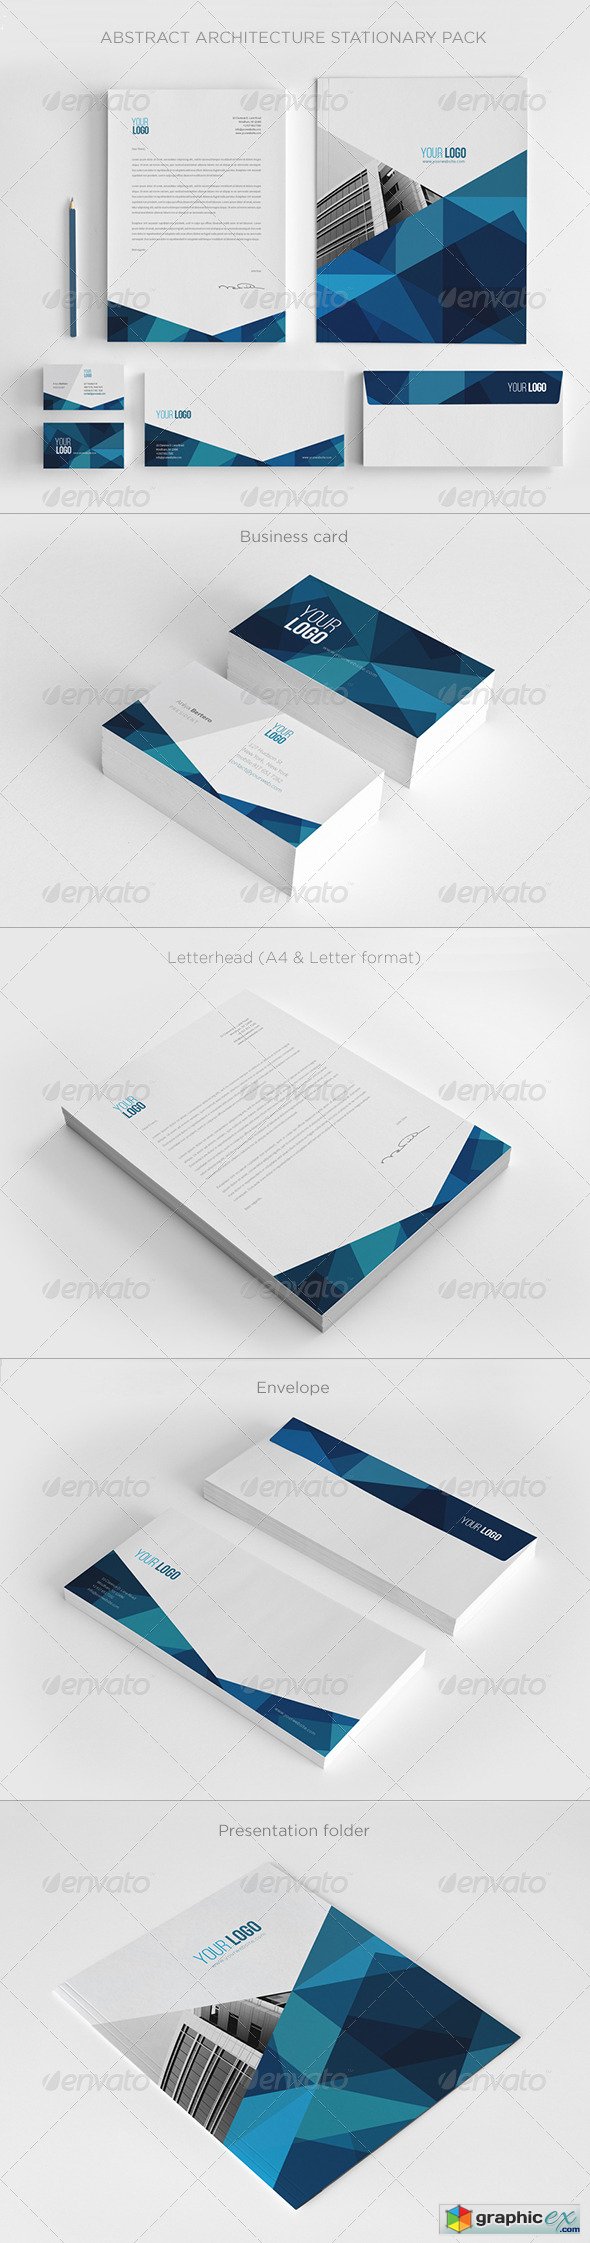 Abstract Architecture Stationery Pack 7205071